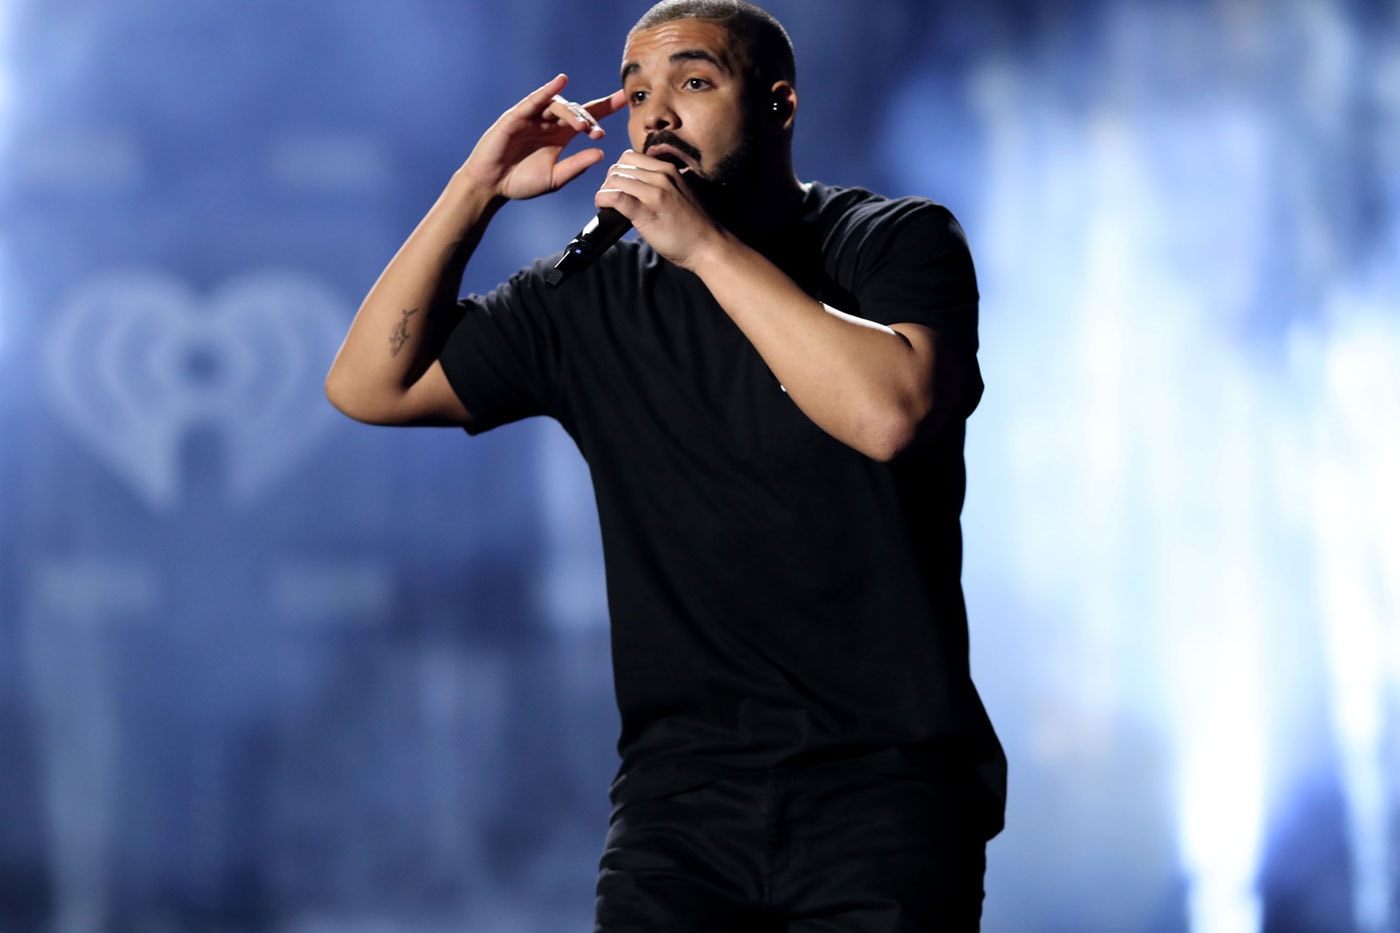 Manager Denies That Apple Stopped Drake's Performance in TIDAL Live Stream